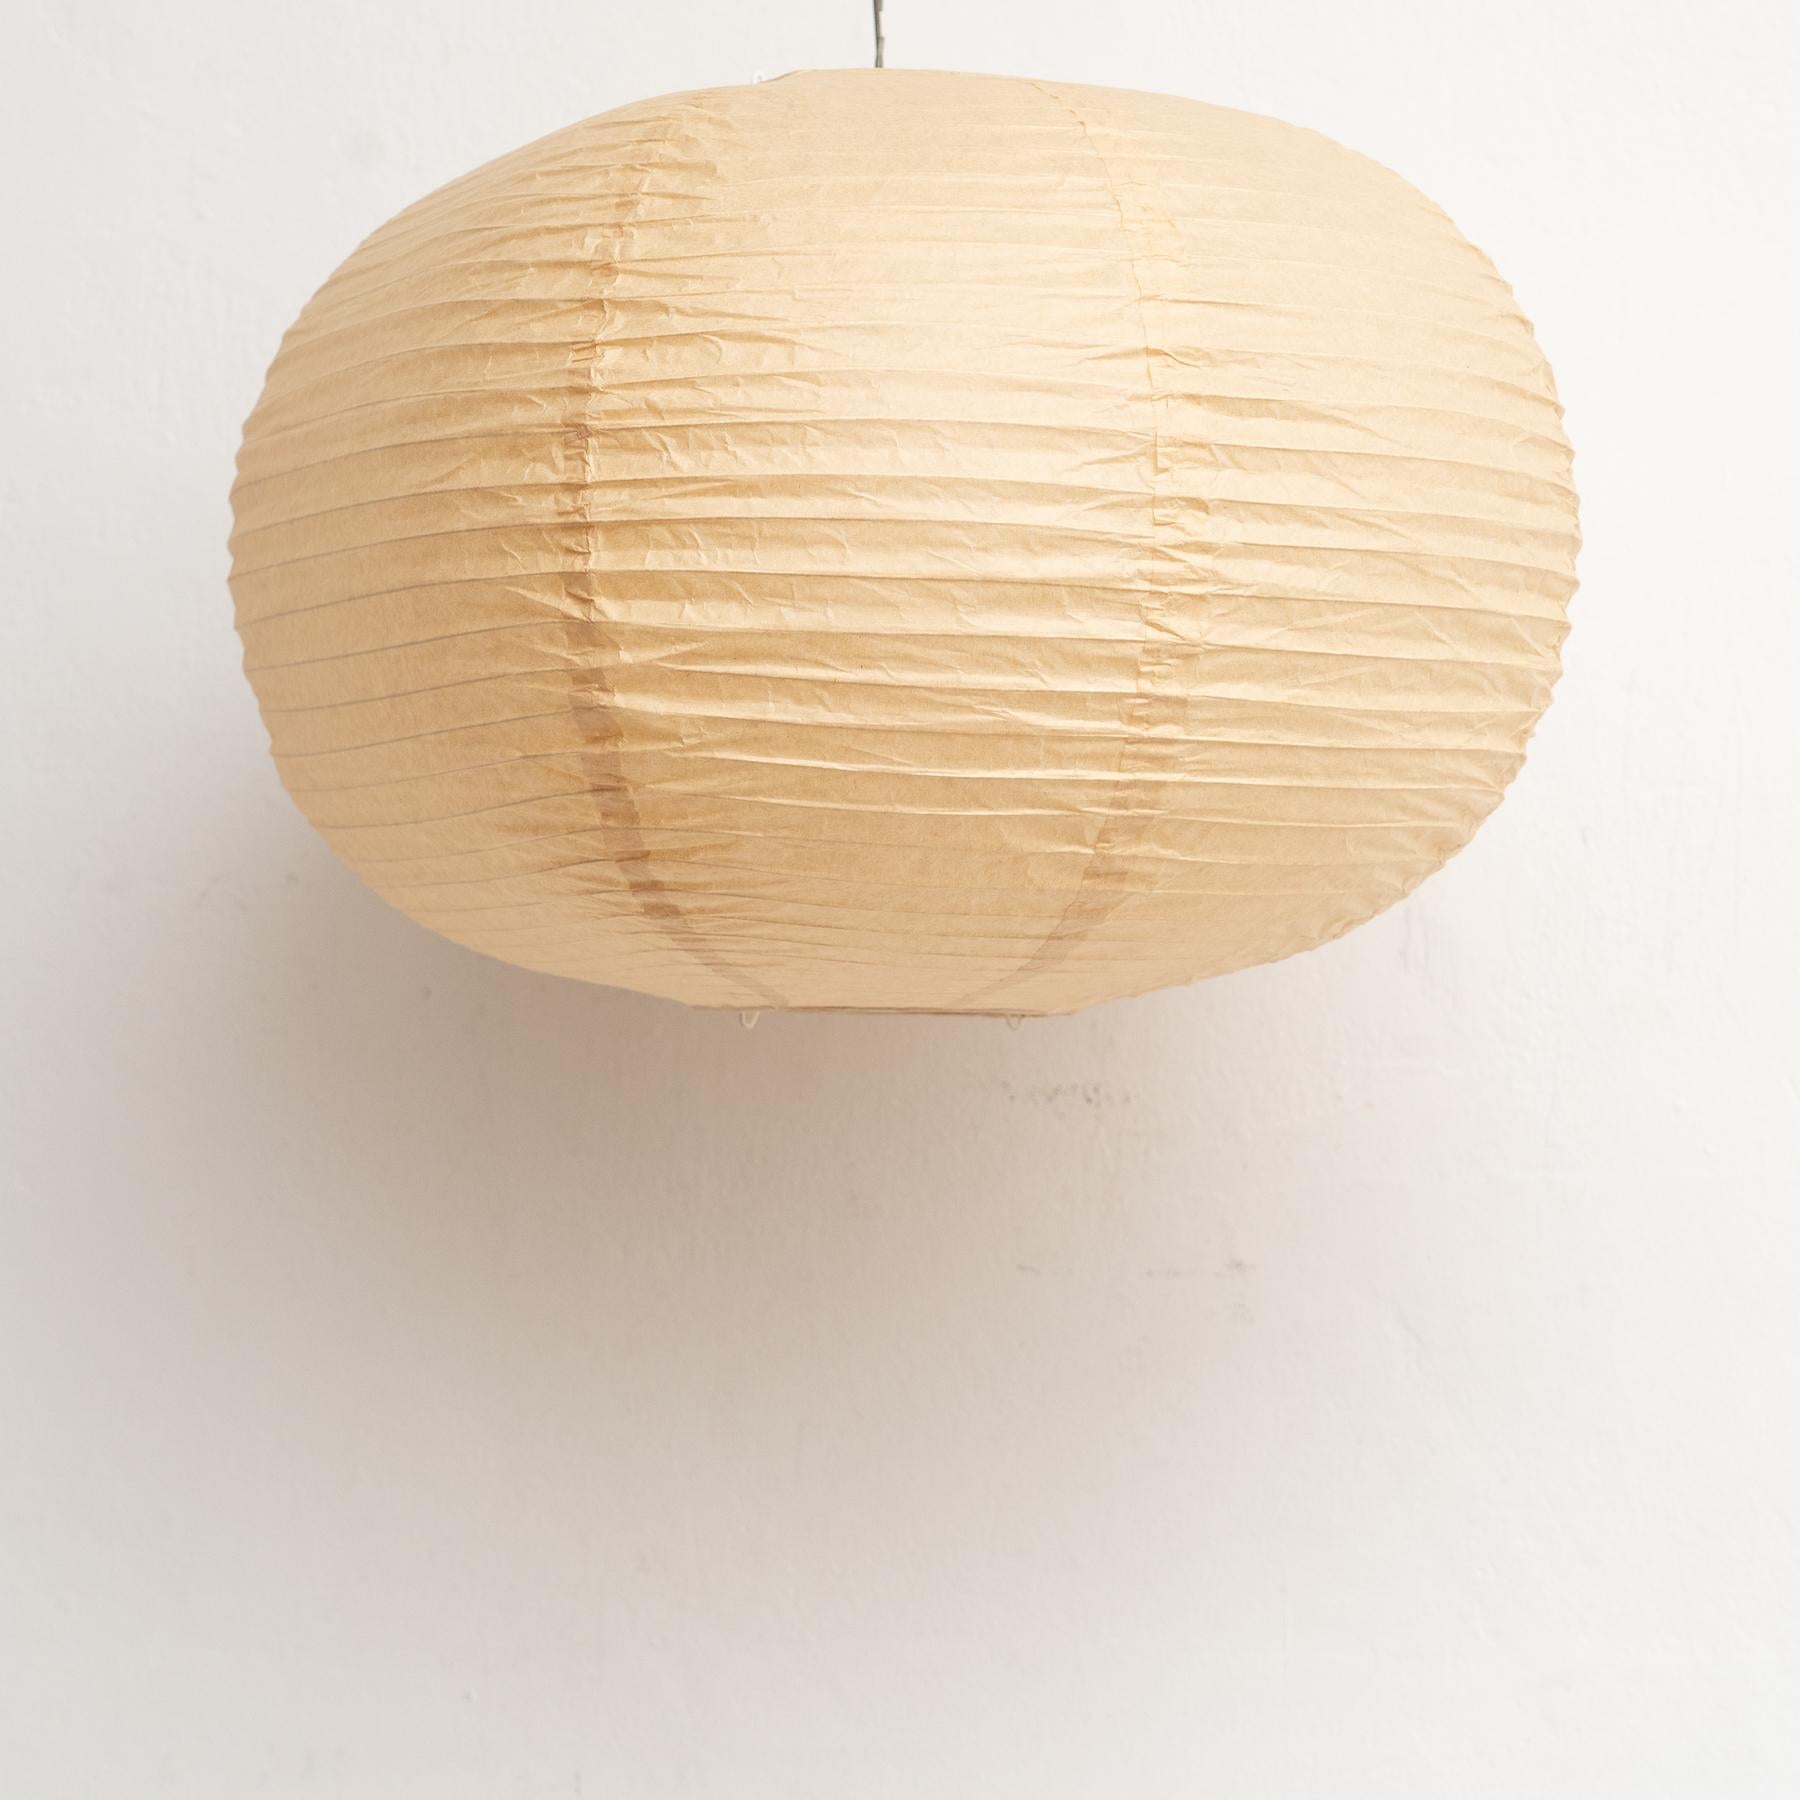 Mid Century Modern Paper Lamp After Isamu Noguchi

By unknown manufacturer, circa 1990.

In good original condition, with minor wear consistent of age and use, preserving a beautiful patina.

Paper shade only, no electrification or bulb included.